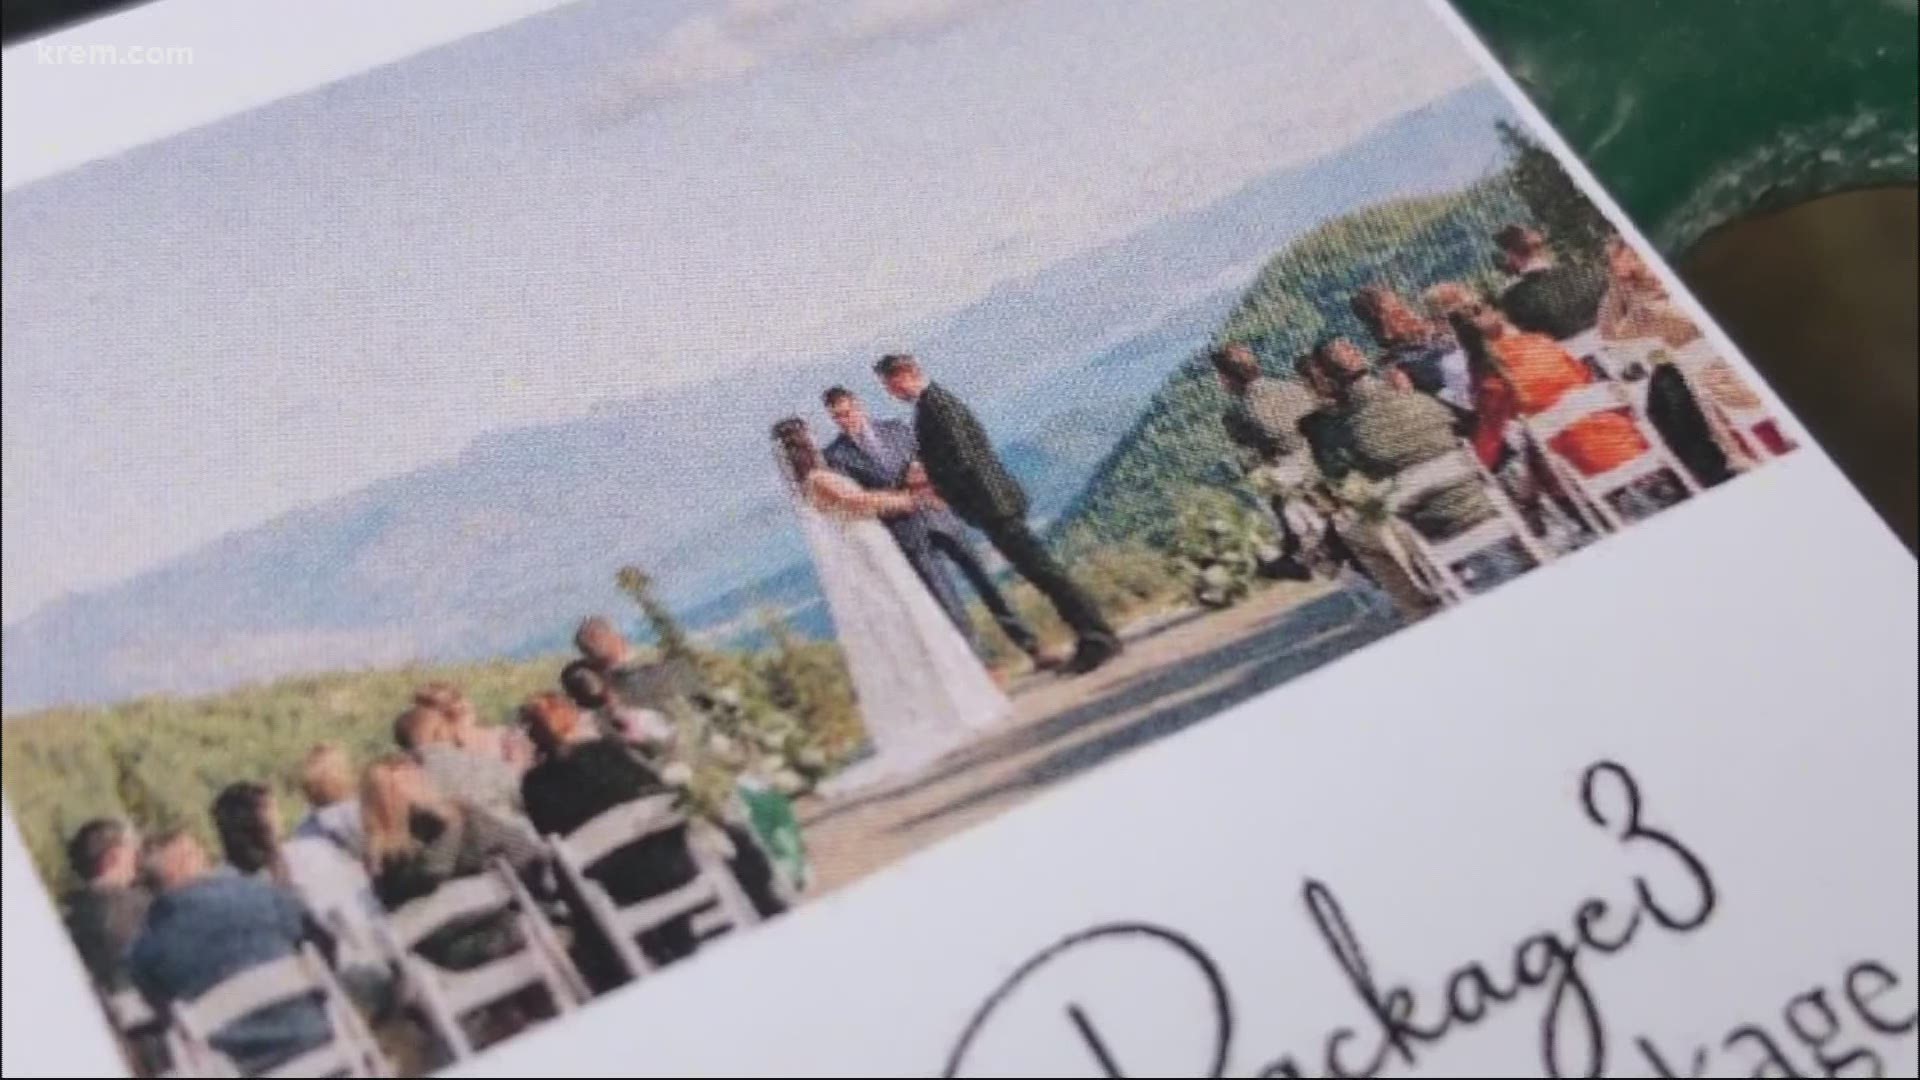 Local wedding vendors say they're booked for the summer and beyond after weddings were canceled or postponed in 2020.